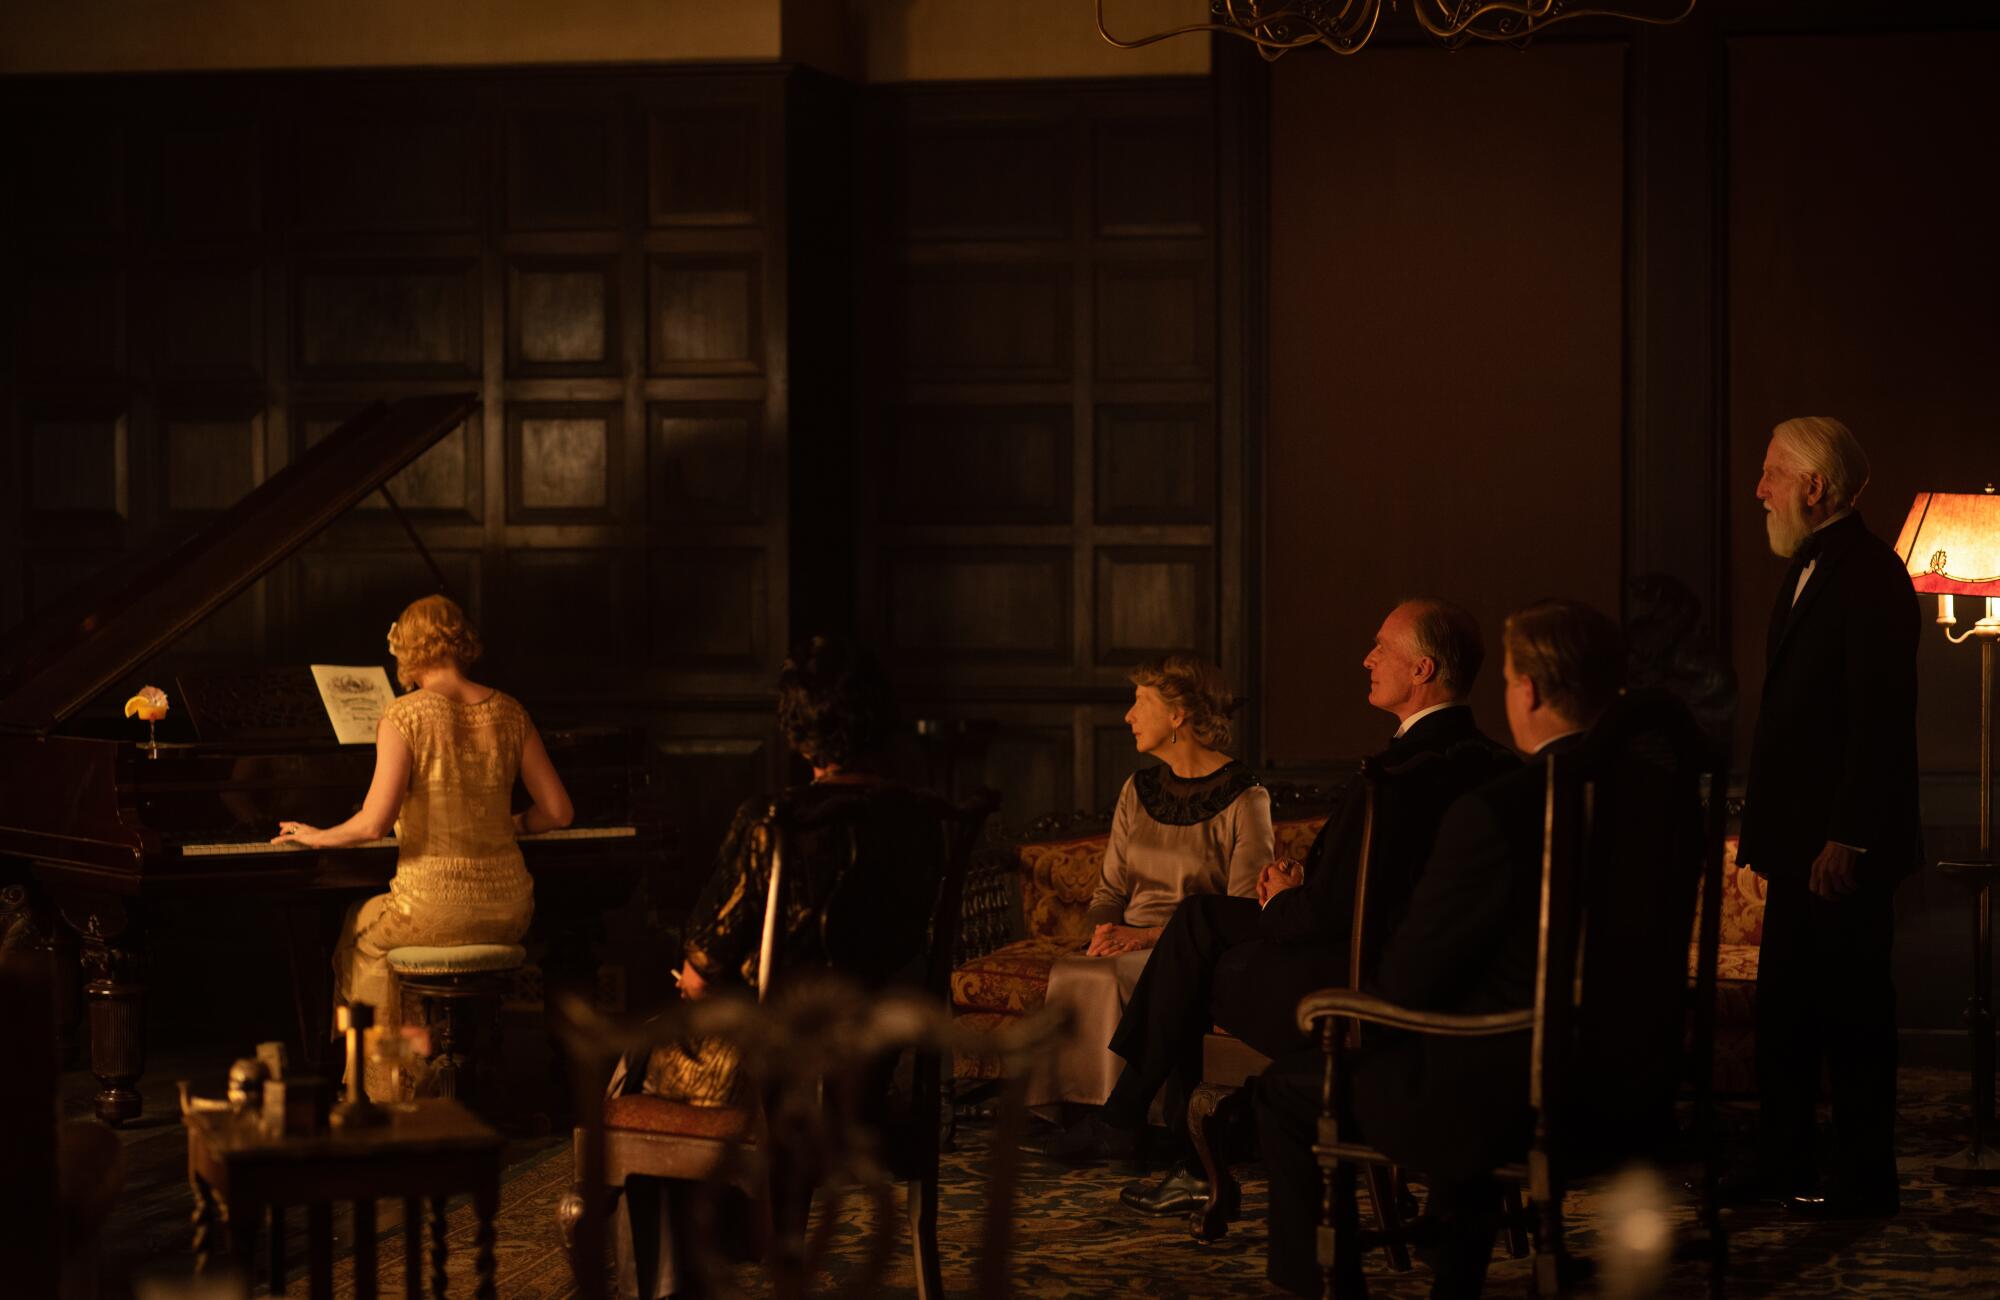 Kirsten Dunst plays piano as Rose Gordon in "The Power of The Dog."